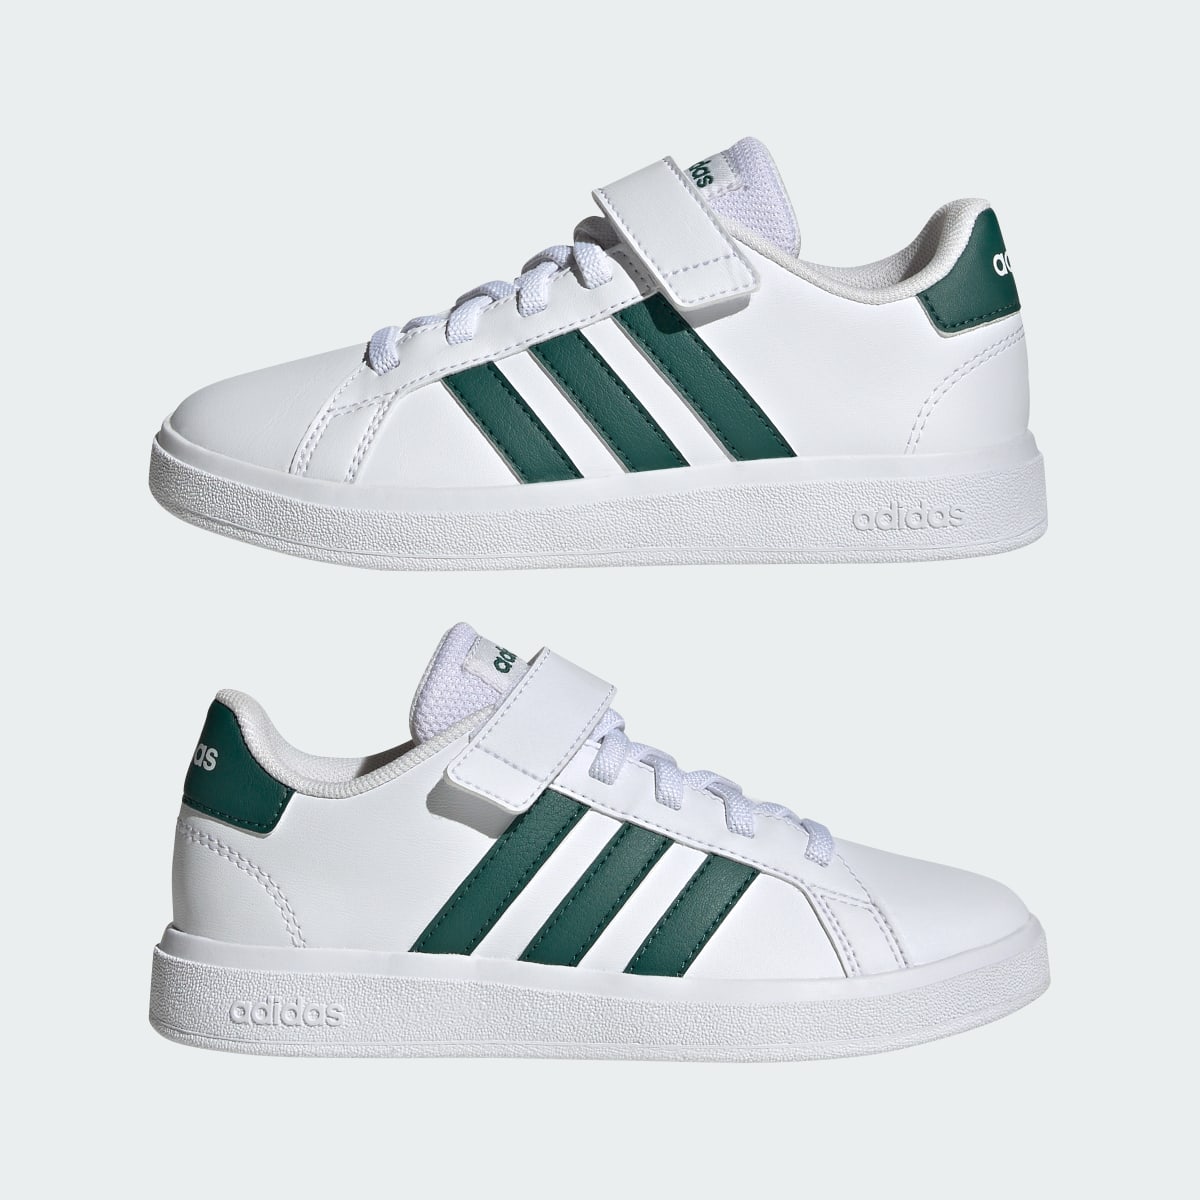 Adidas Grand Court Elastic Lace and Top Strap Shoes. 8